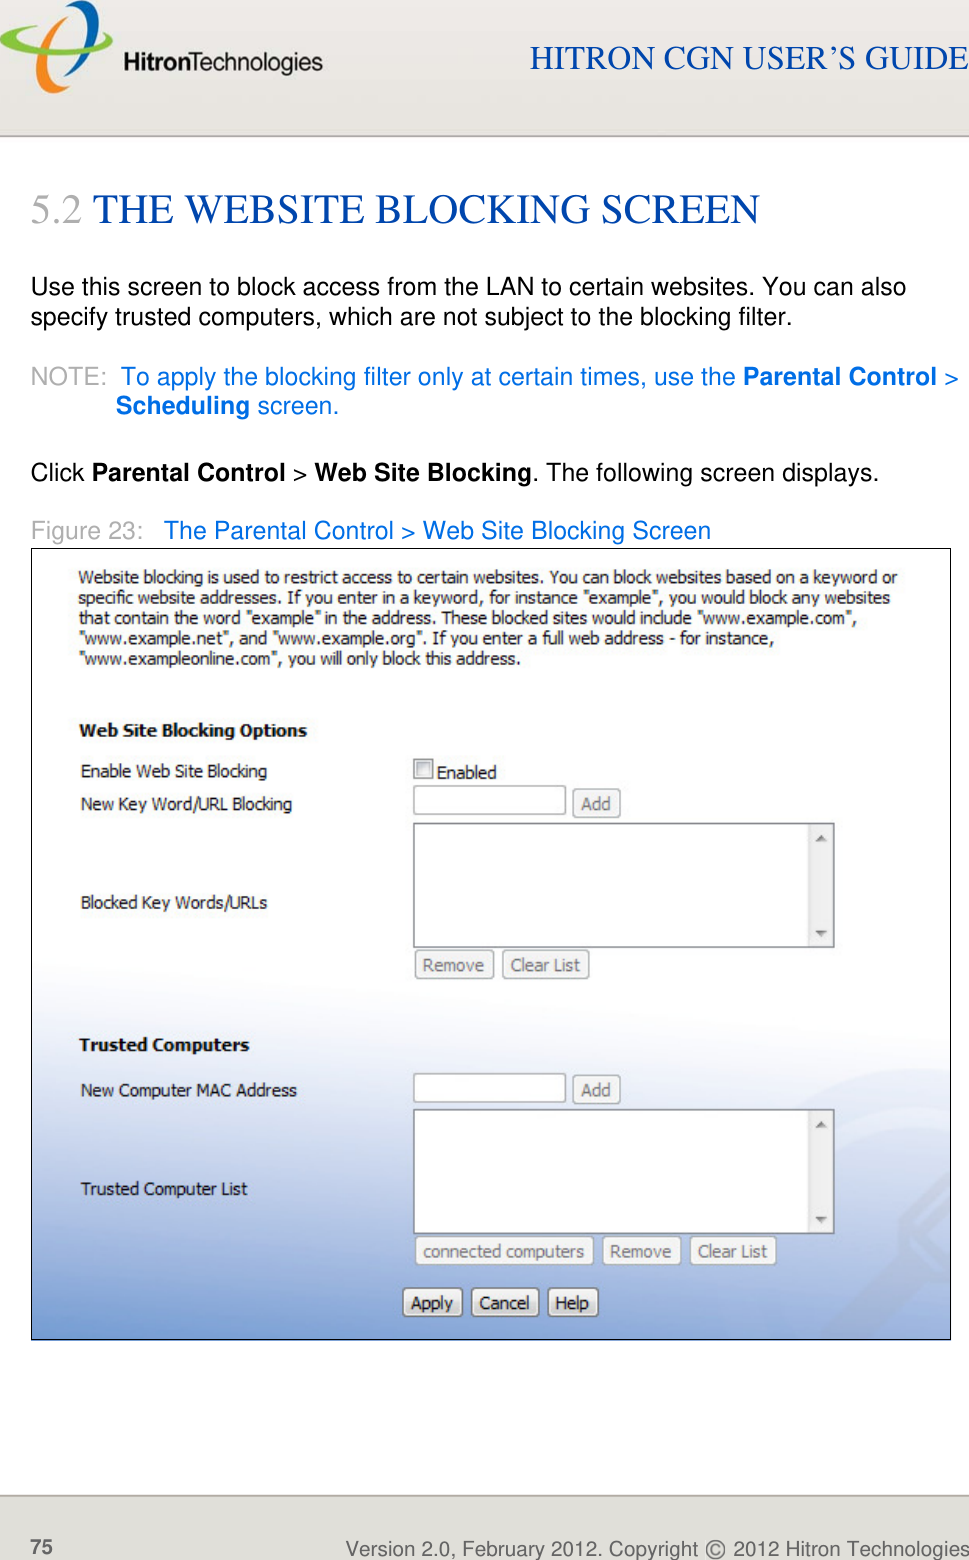 PARENTAL CONTROLVersion 2.0, February 2012. Copyright   2012 Hitron Technologies75Version 2.0, February 2012. Copyright   2012 Hitron Technologies75HITRON CGN USER’S GUIDE5.2 THE WEBSITE BLOCKING SCREENUse this screen to block access from the LAN to certain websites. You can also specify trusted computers, which are not subject to the blocking filter.NOTE:  To apply the blocking filter only at certain times, use the Parental Control &gt; Scheduling screen.Click Parental Control &gt; Web Site Blocking. The following screen displays.Figure 23:   The Parental Control &gt; Web Site Blocking Screen